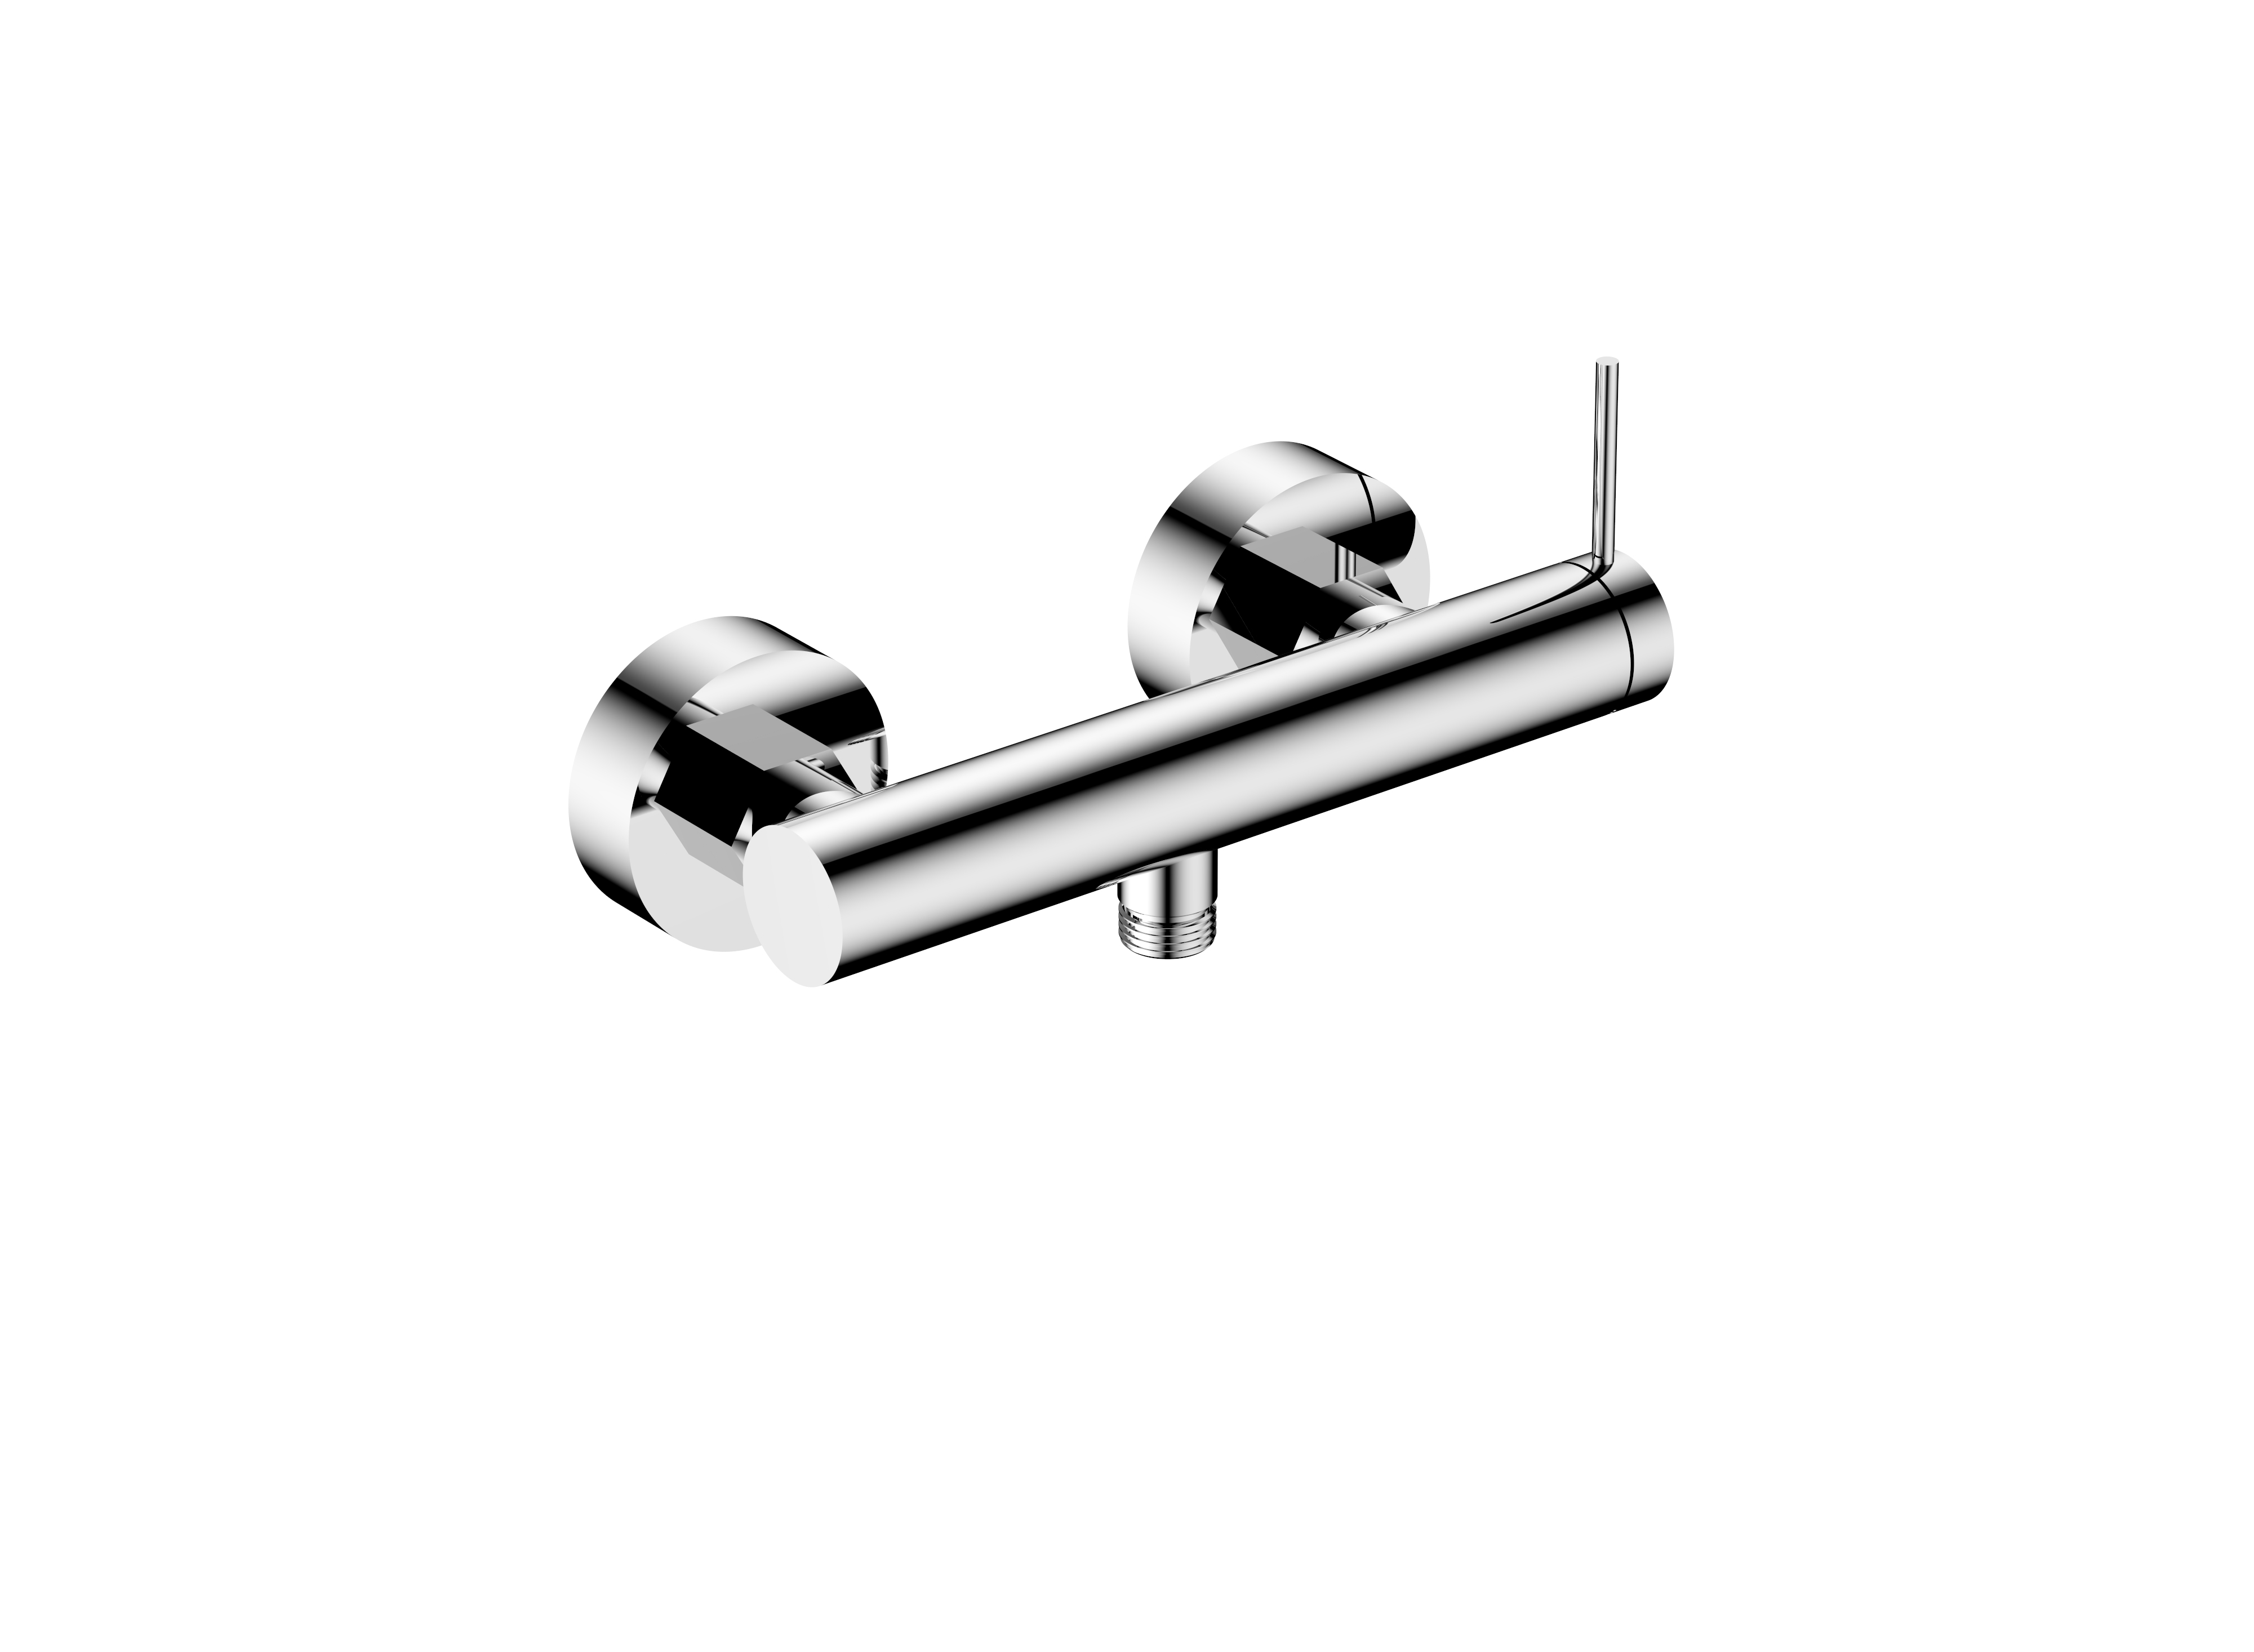 Wall Mounted Bathroom Shower Mixer Faucet without Slide Bar D05 0090